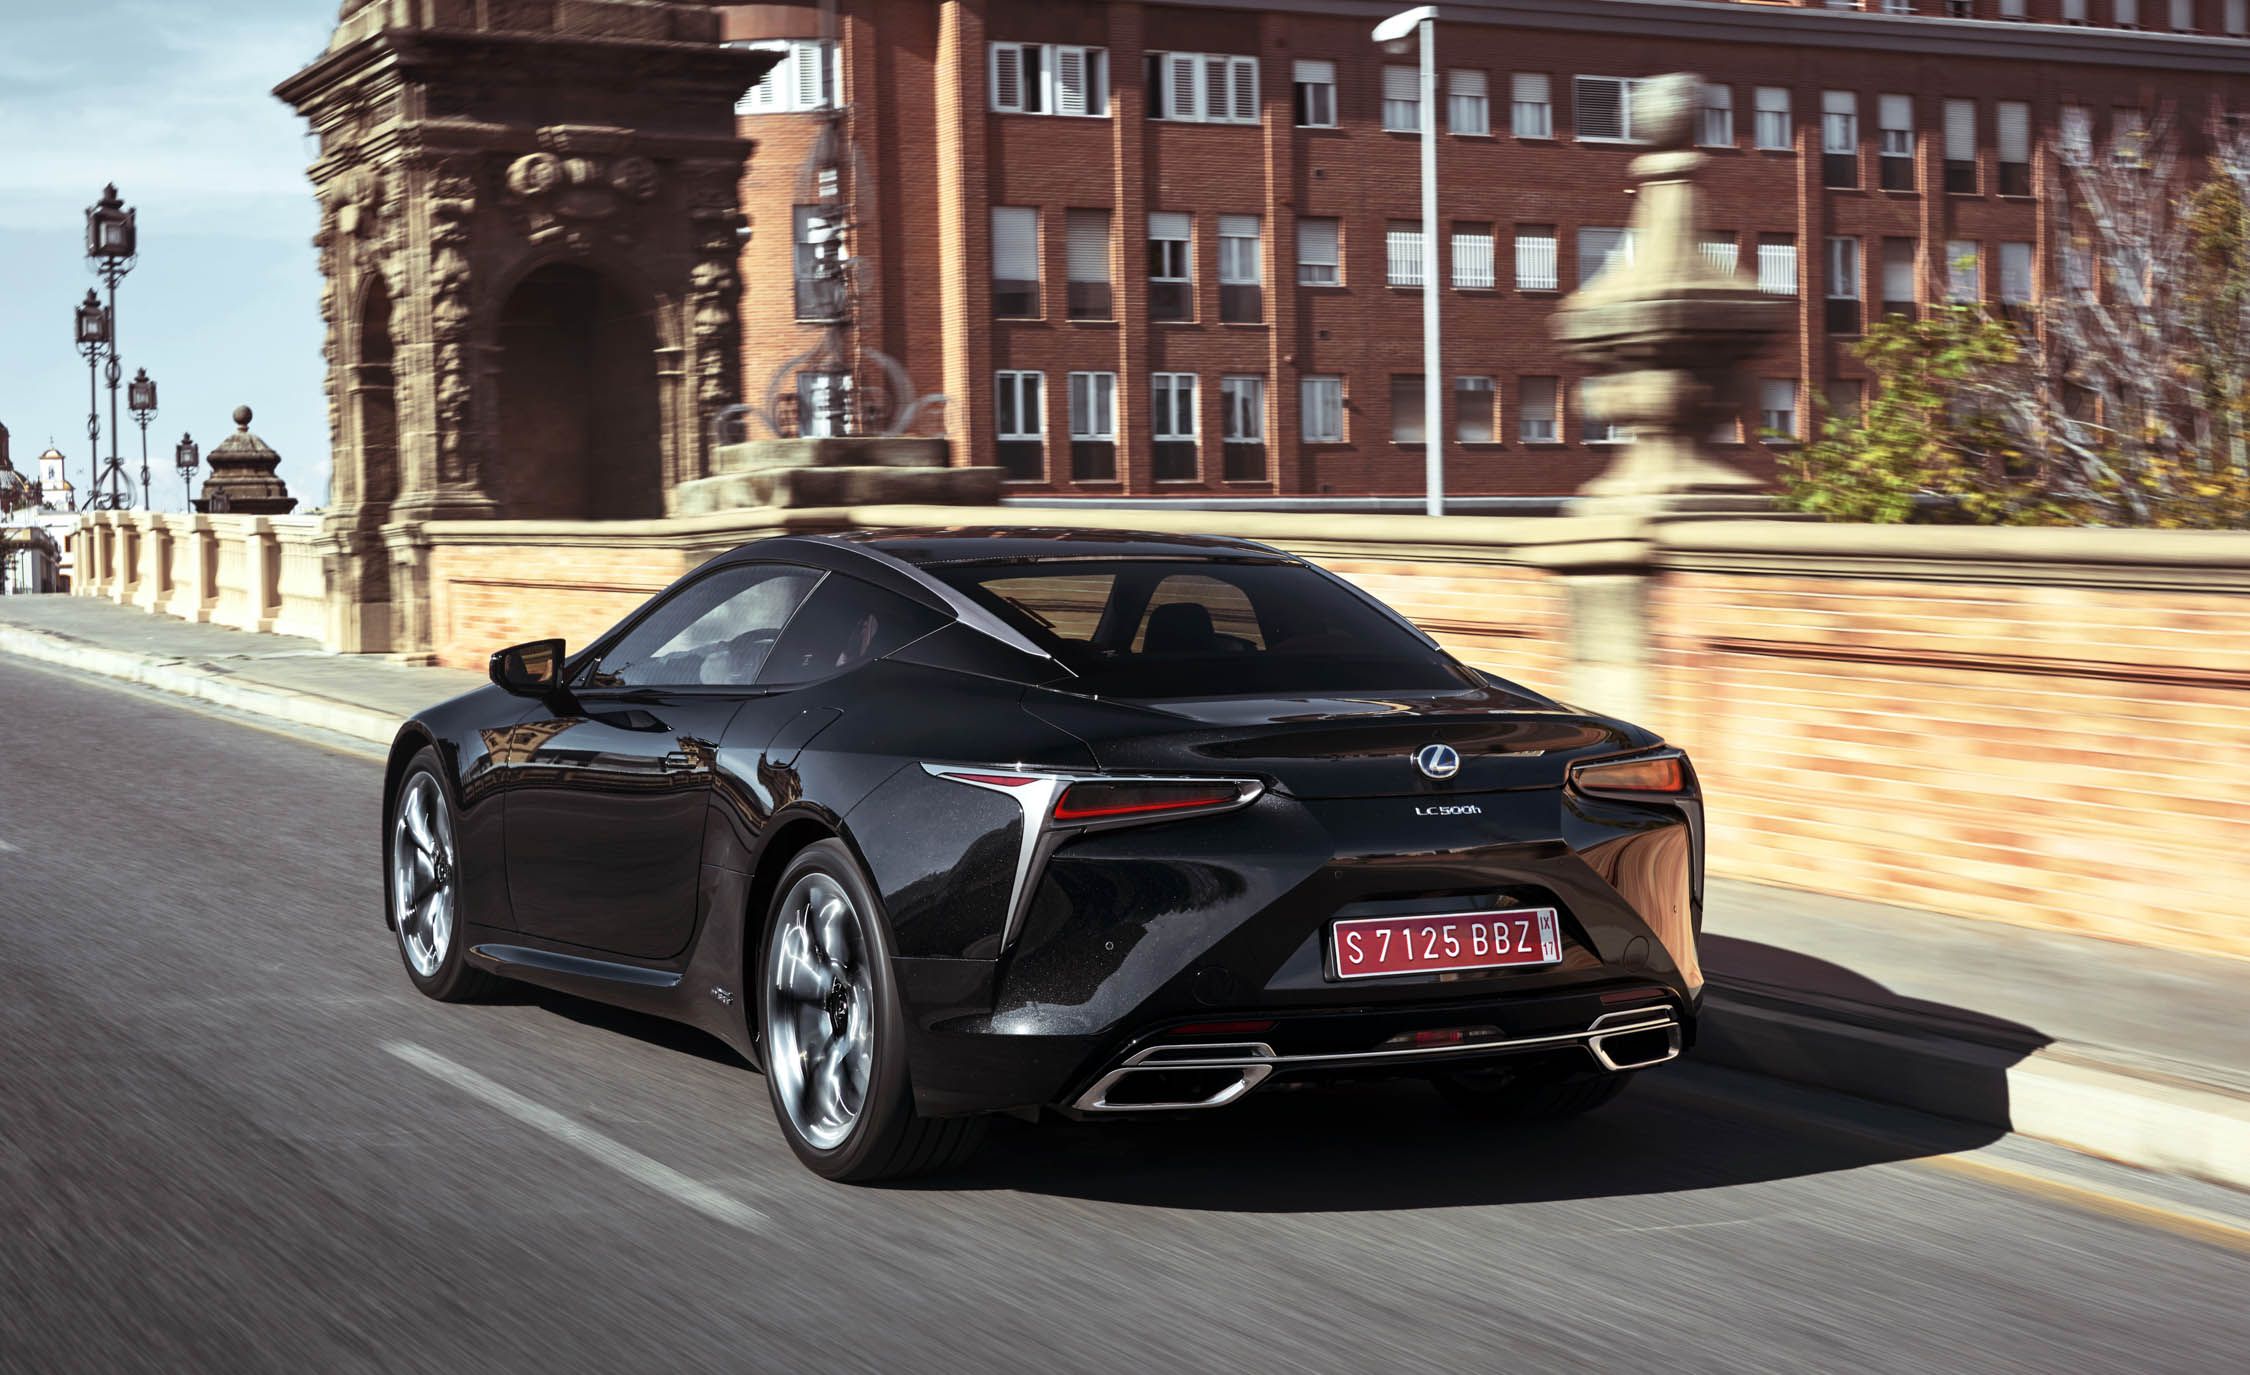 2018 Lexus Lc 500h Black Rear And Side View (Photo 47 of 84)